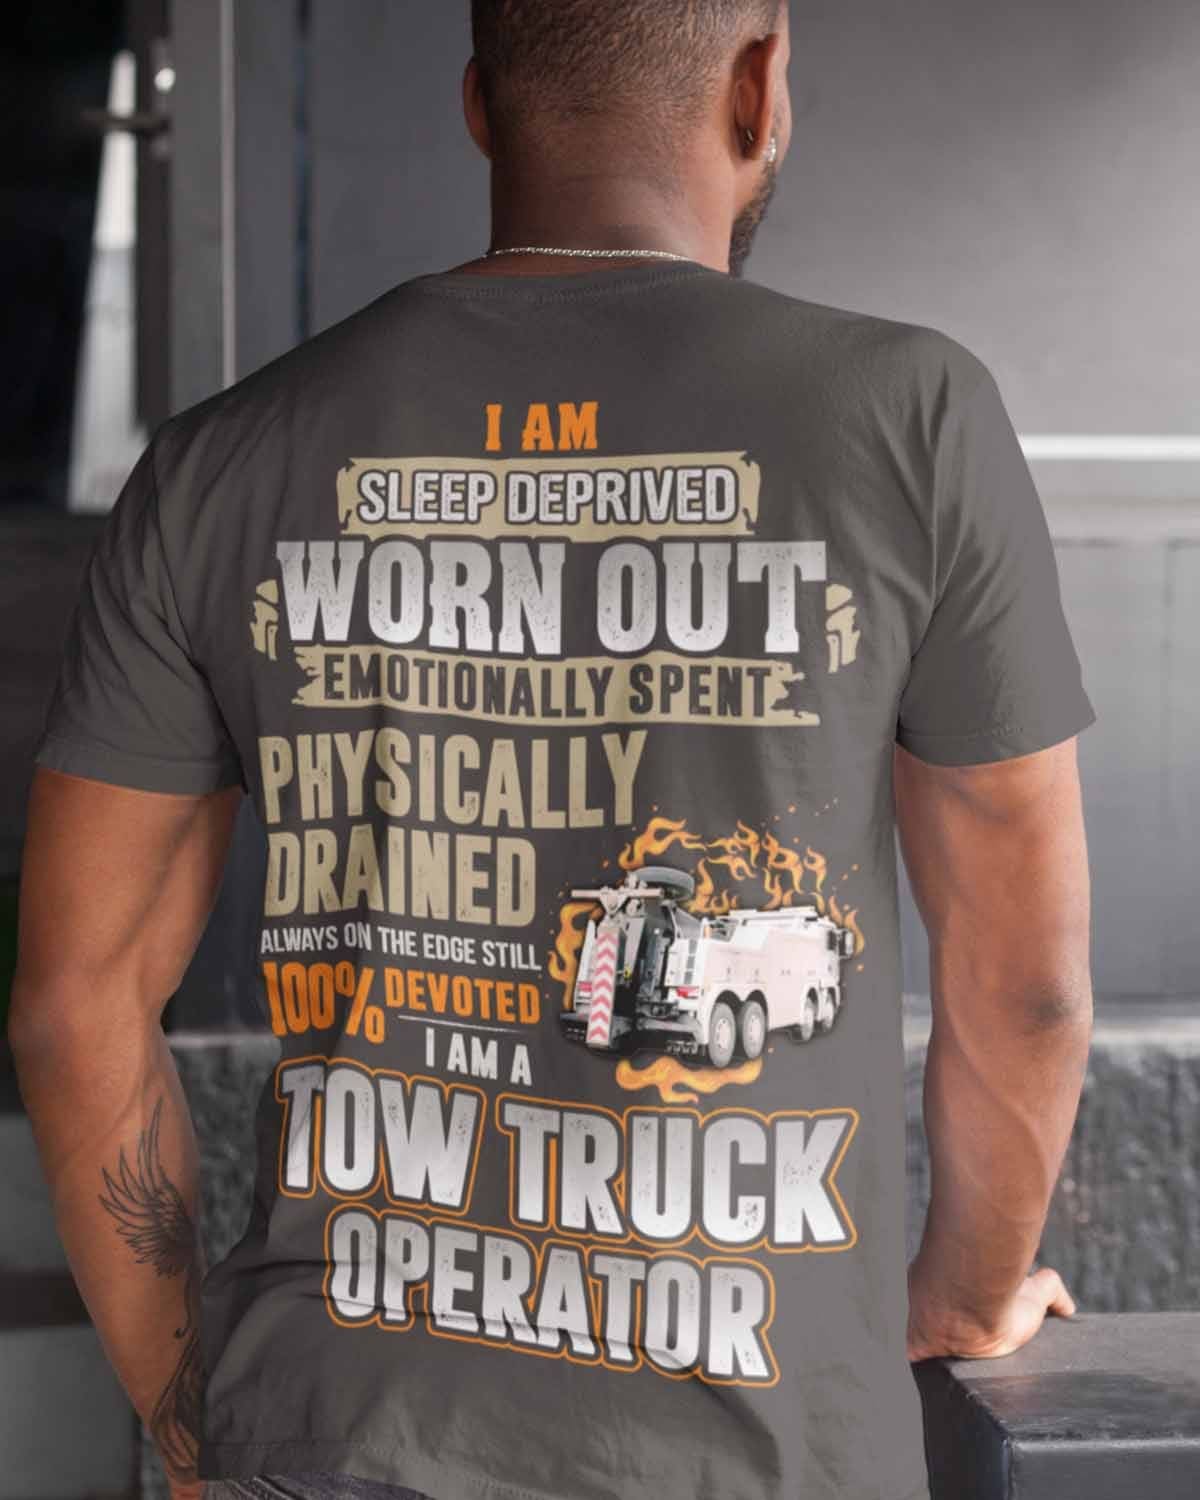 Tow Truck Operator - I am sleep deprived emotionally spent physically drained always on the edge still 100% devoted